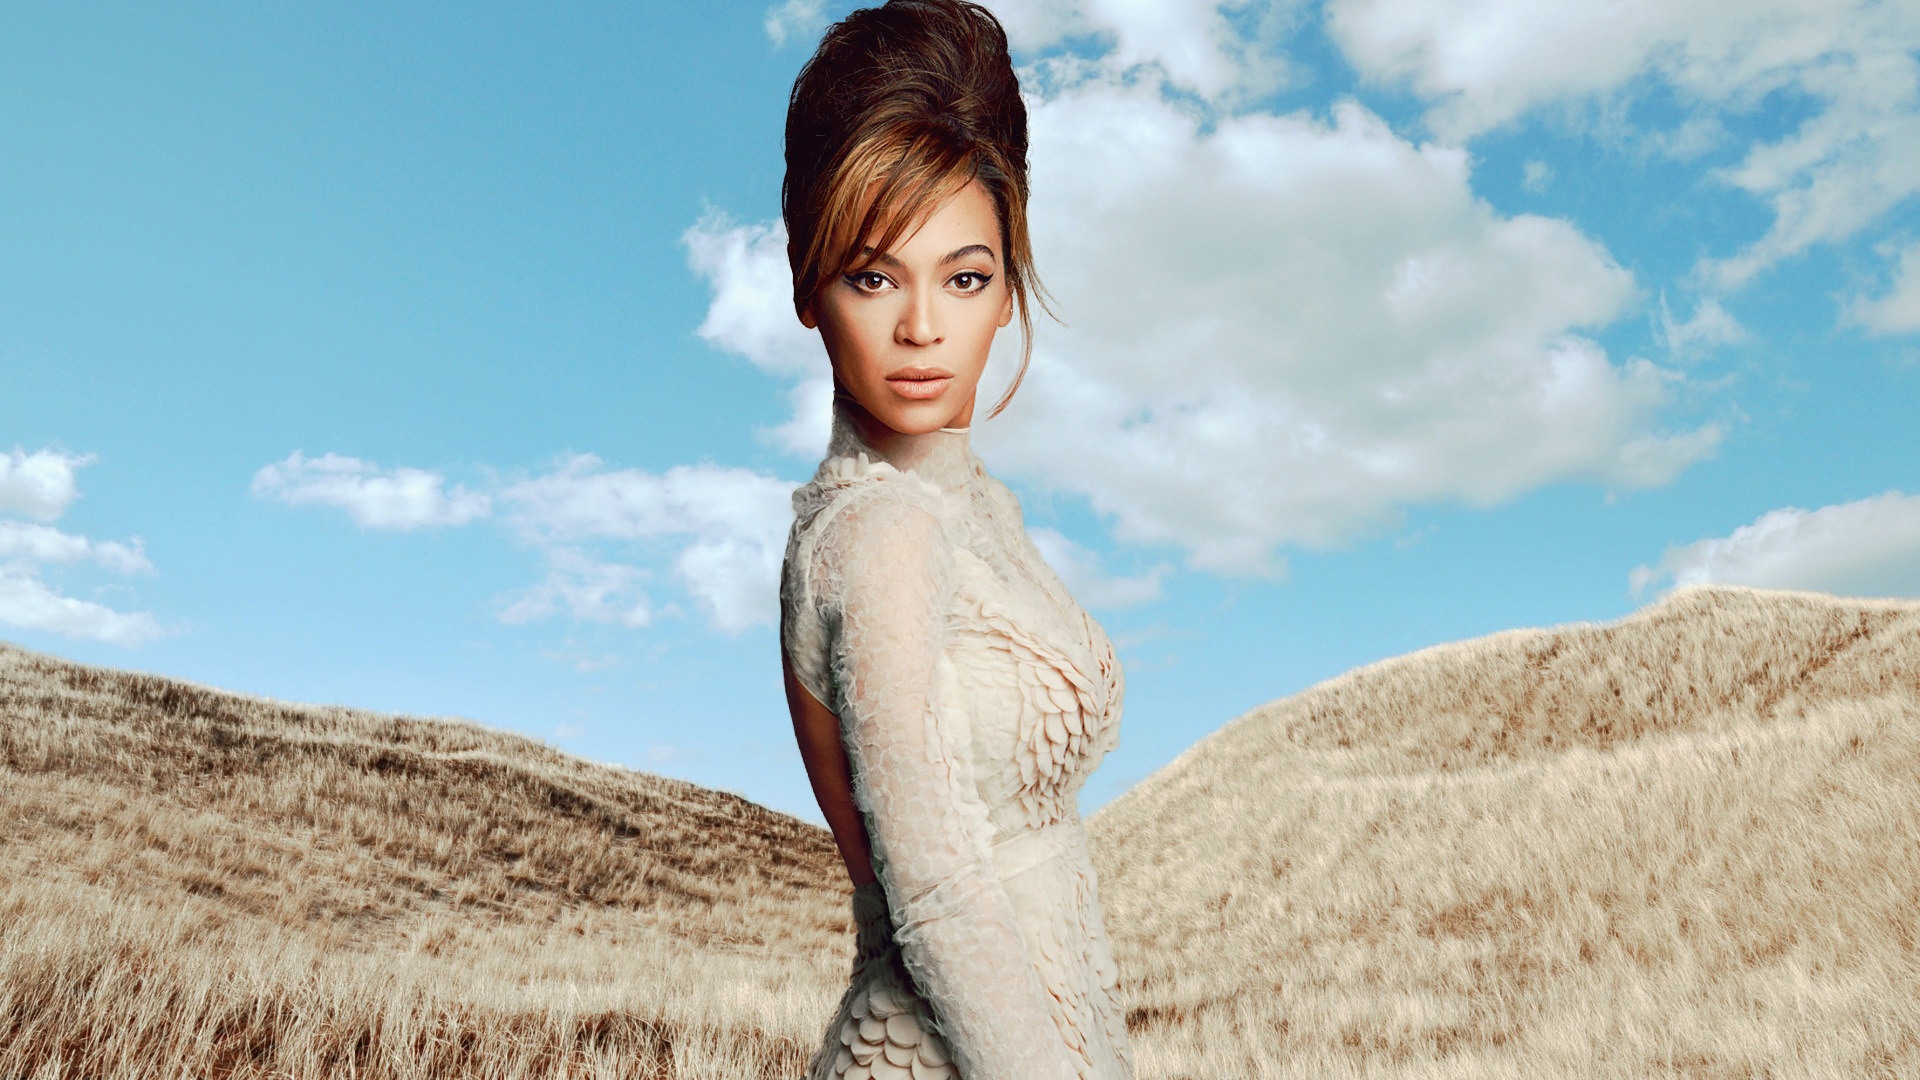 Beyonce Beautiful for 1920 x 1080 HDTV 1080p resolution